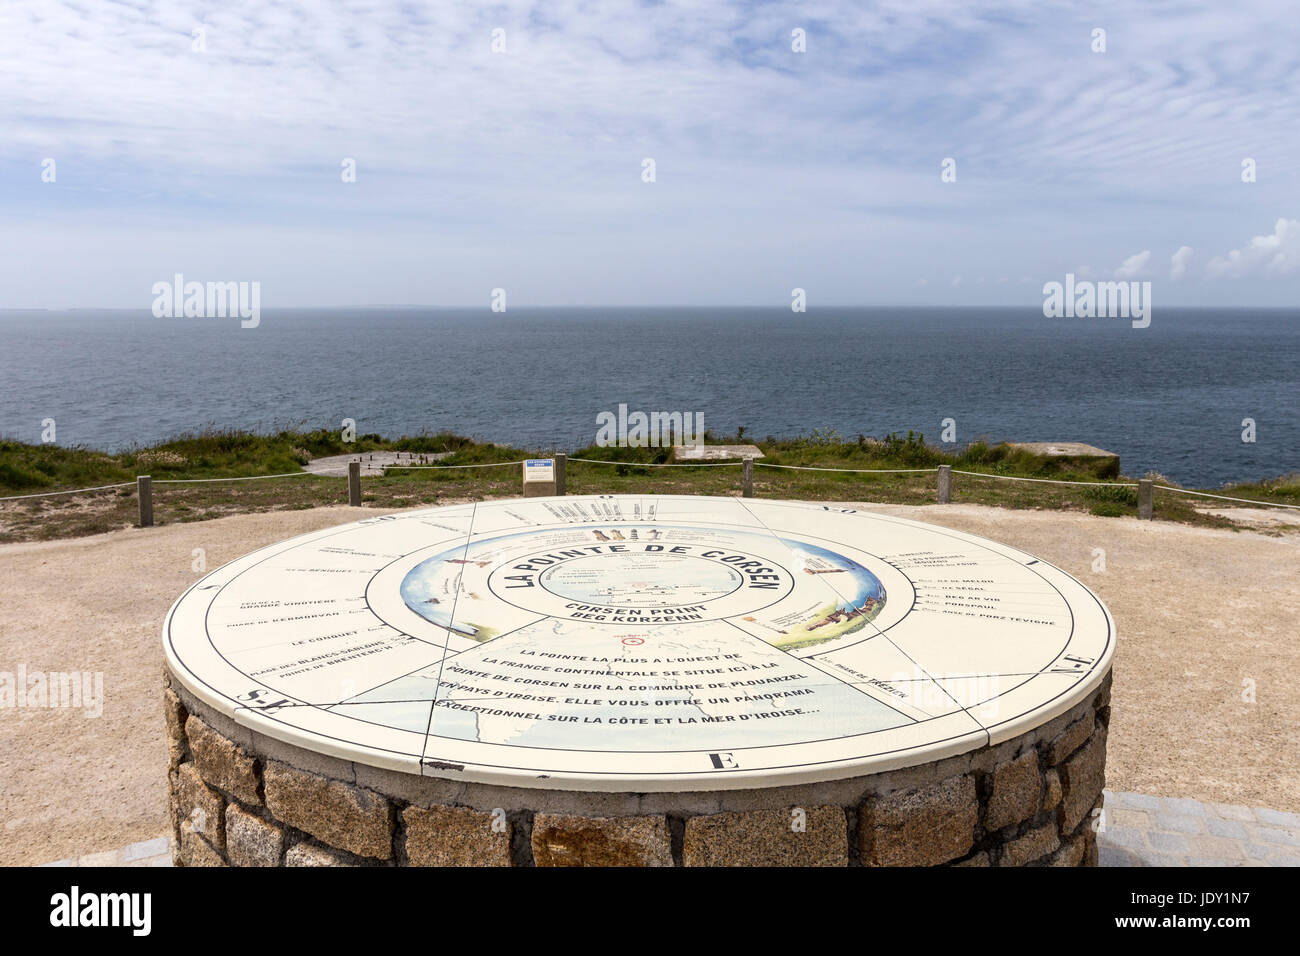 Interpretation Table on the Pointe de Corsen Near Plouarazel, Finistere, Brittany, the Westernmost Point of Continental France Stock Photo